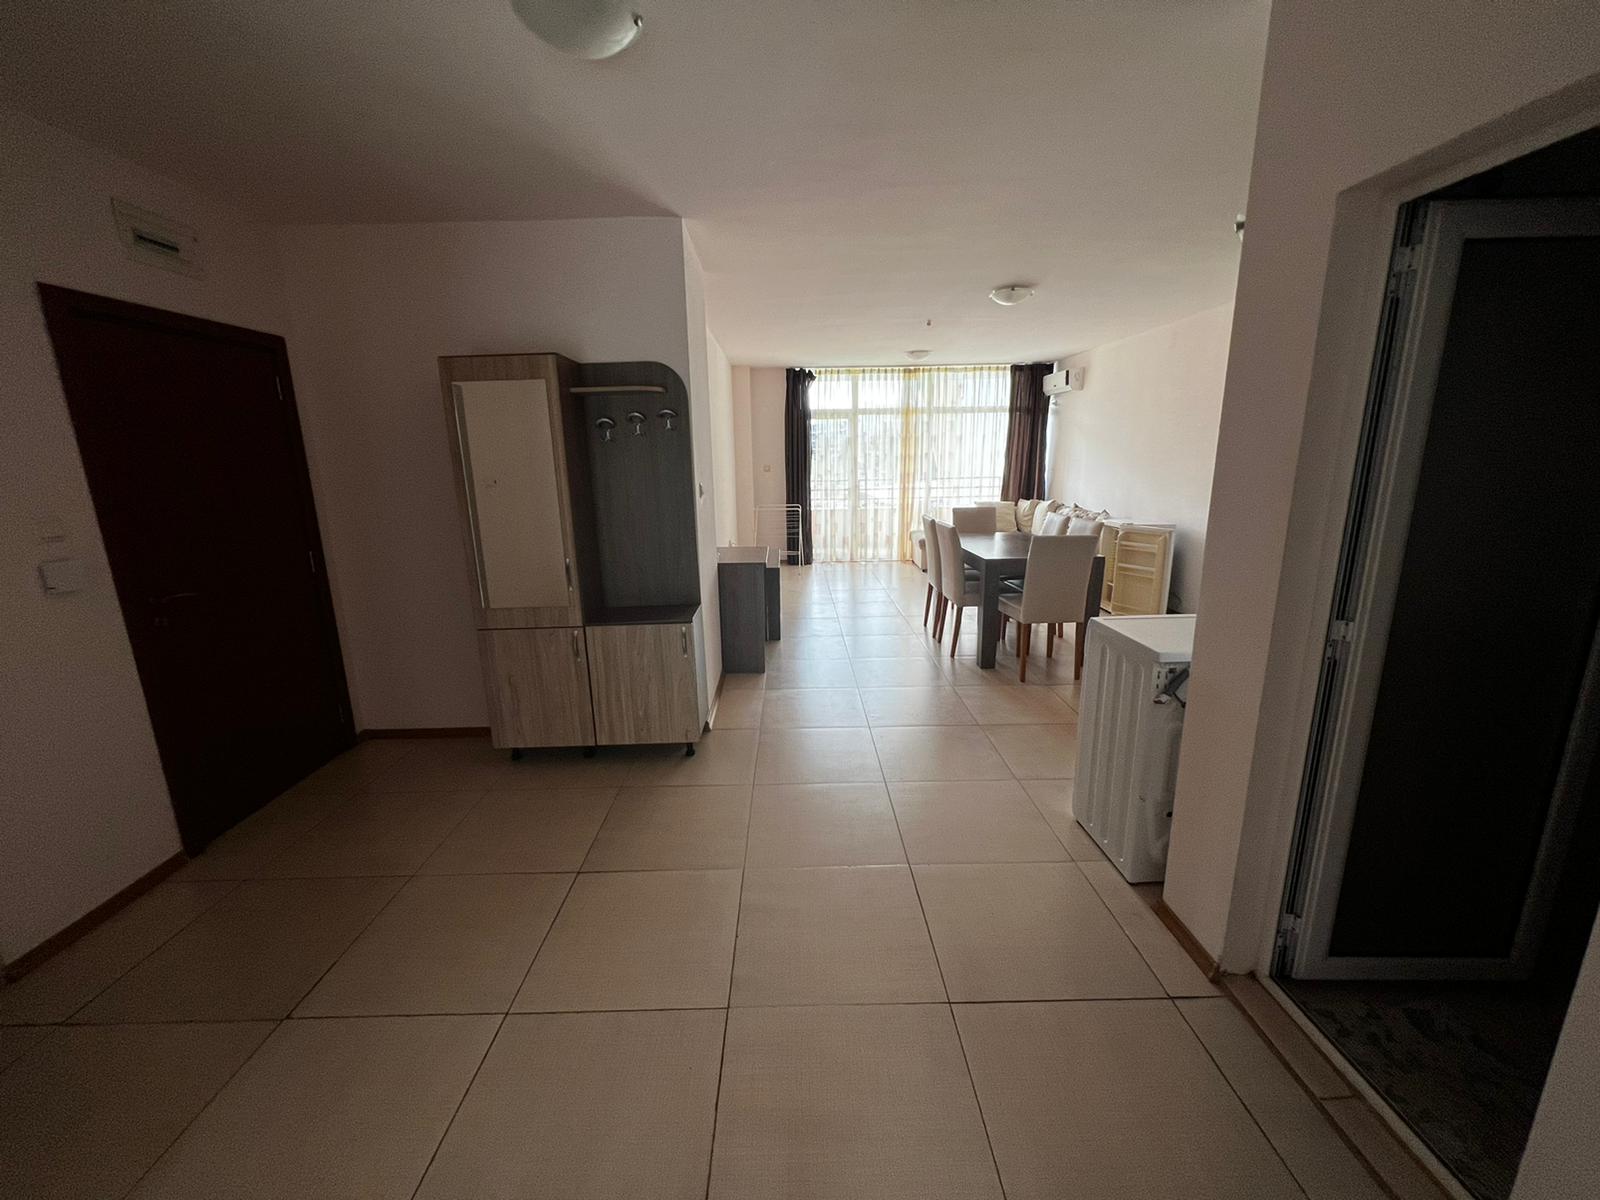 For Sale: An amazing two-bedroom apartment in Sunny Beach